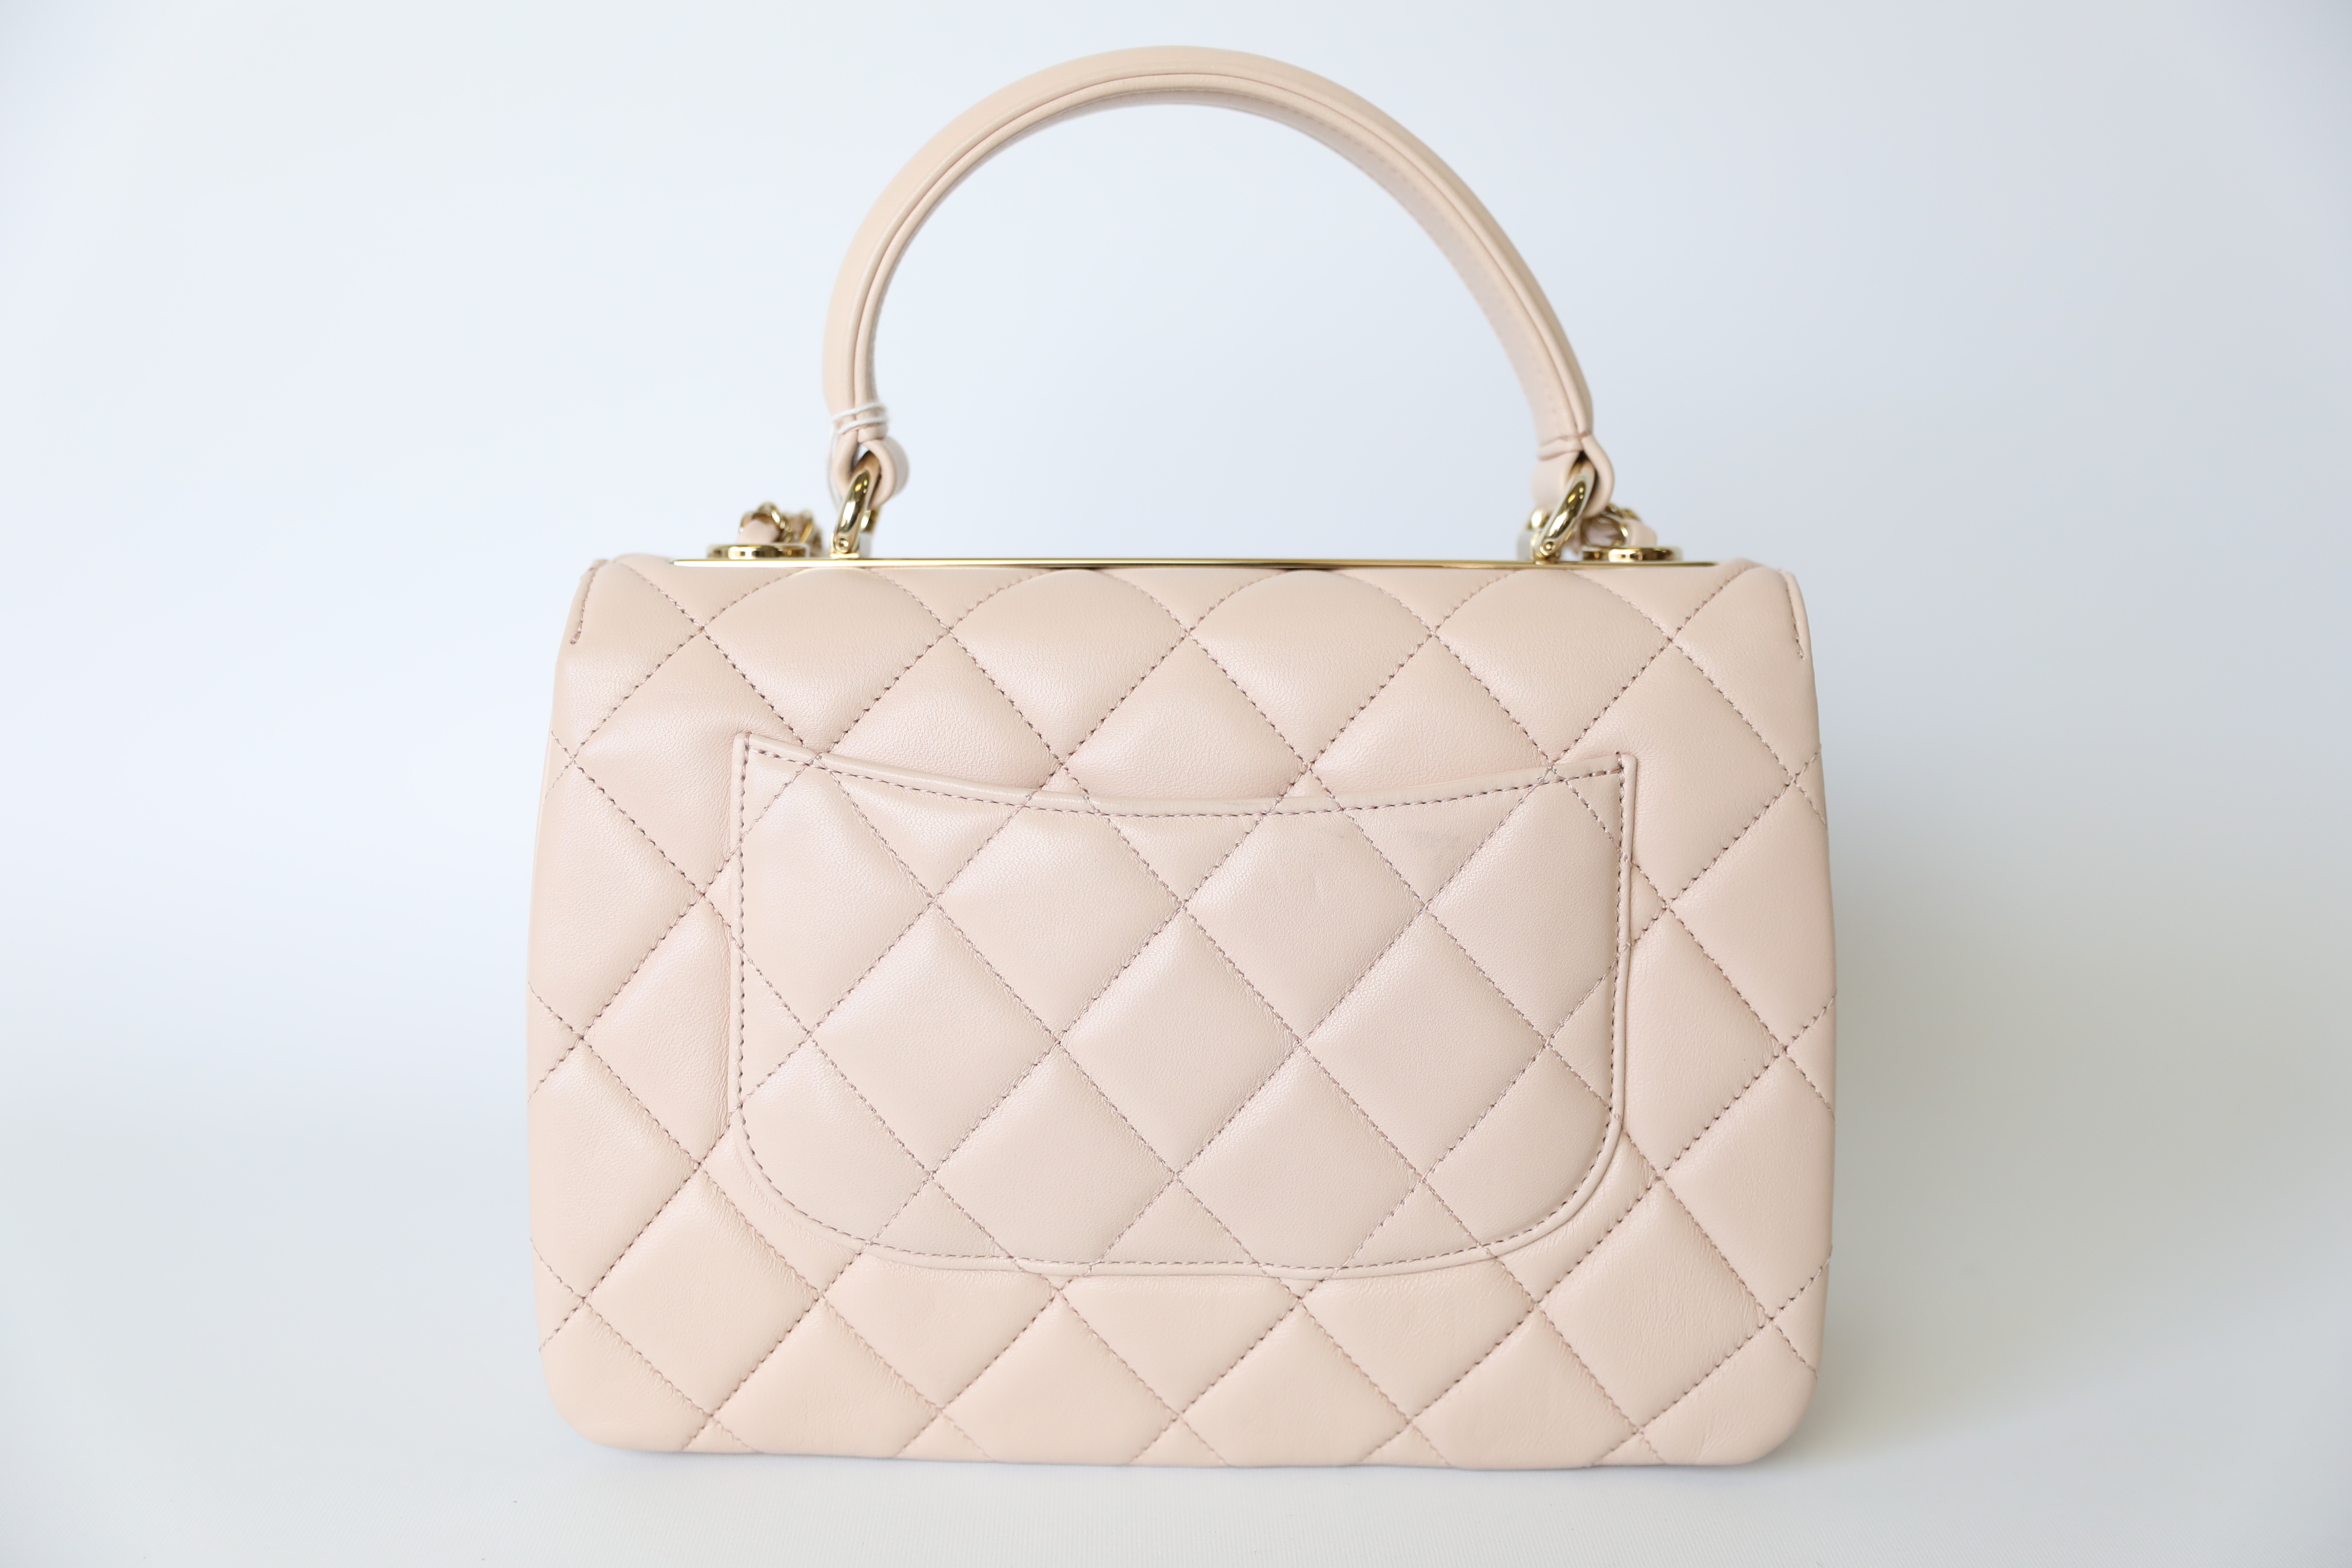 Chanel Business Affinity Small, 22P Pink, Light Gold Hardware, Like New in  Dustbag - Julia Rose Boston